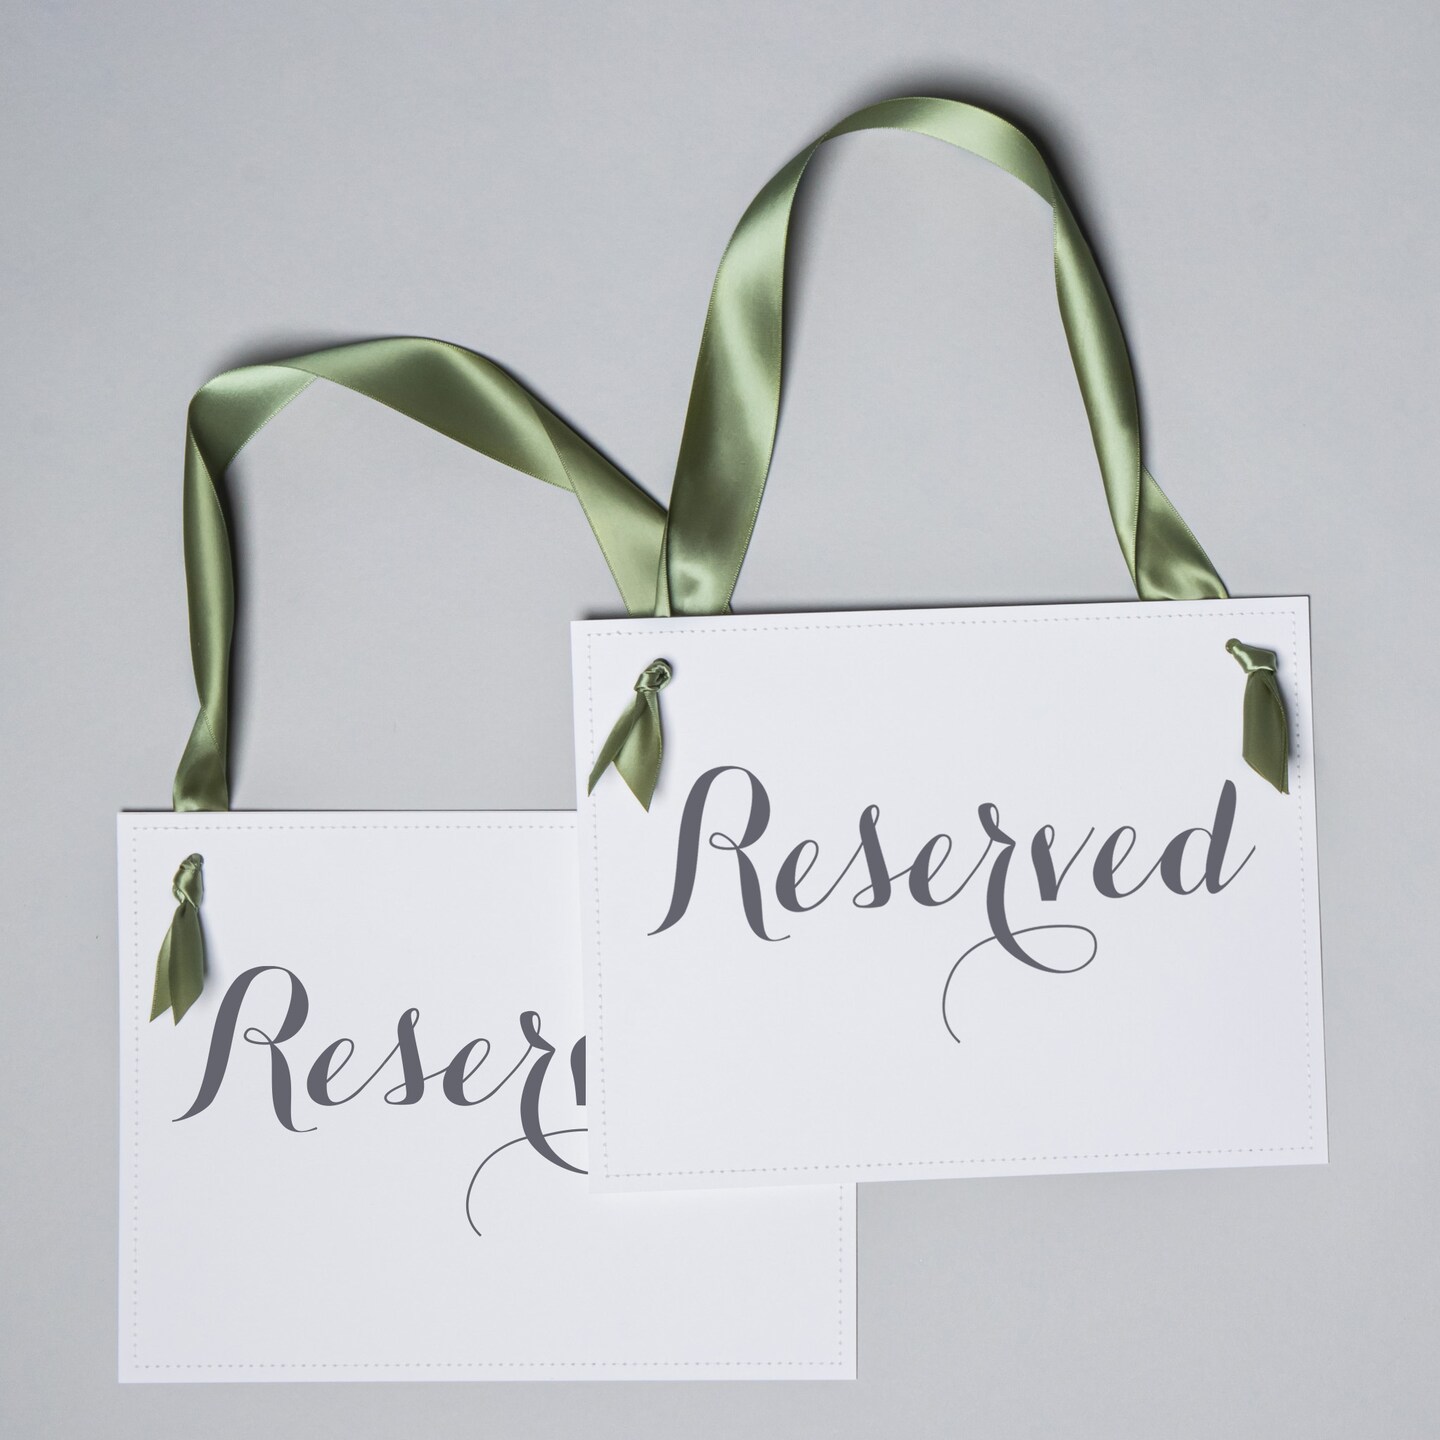 Ritzy Rose 2 Reserved Signs - Black on 11x8in Ivory Linen Cardstock with Moss Green Ribbon